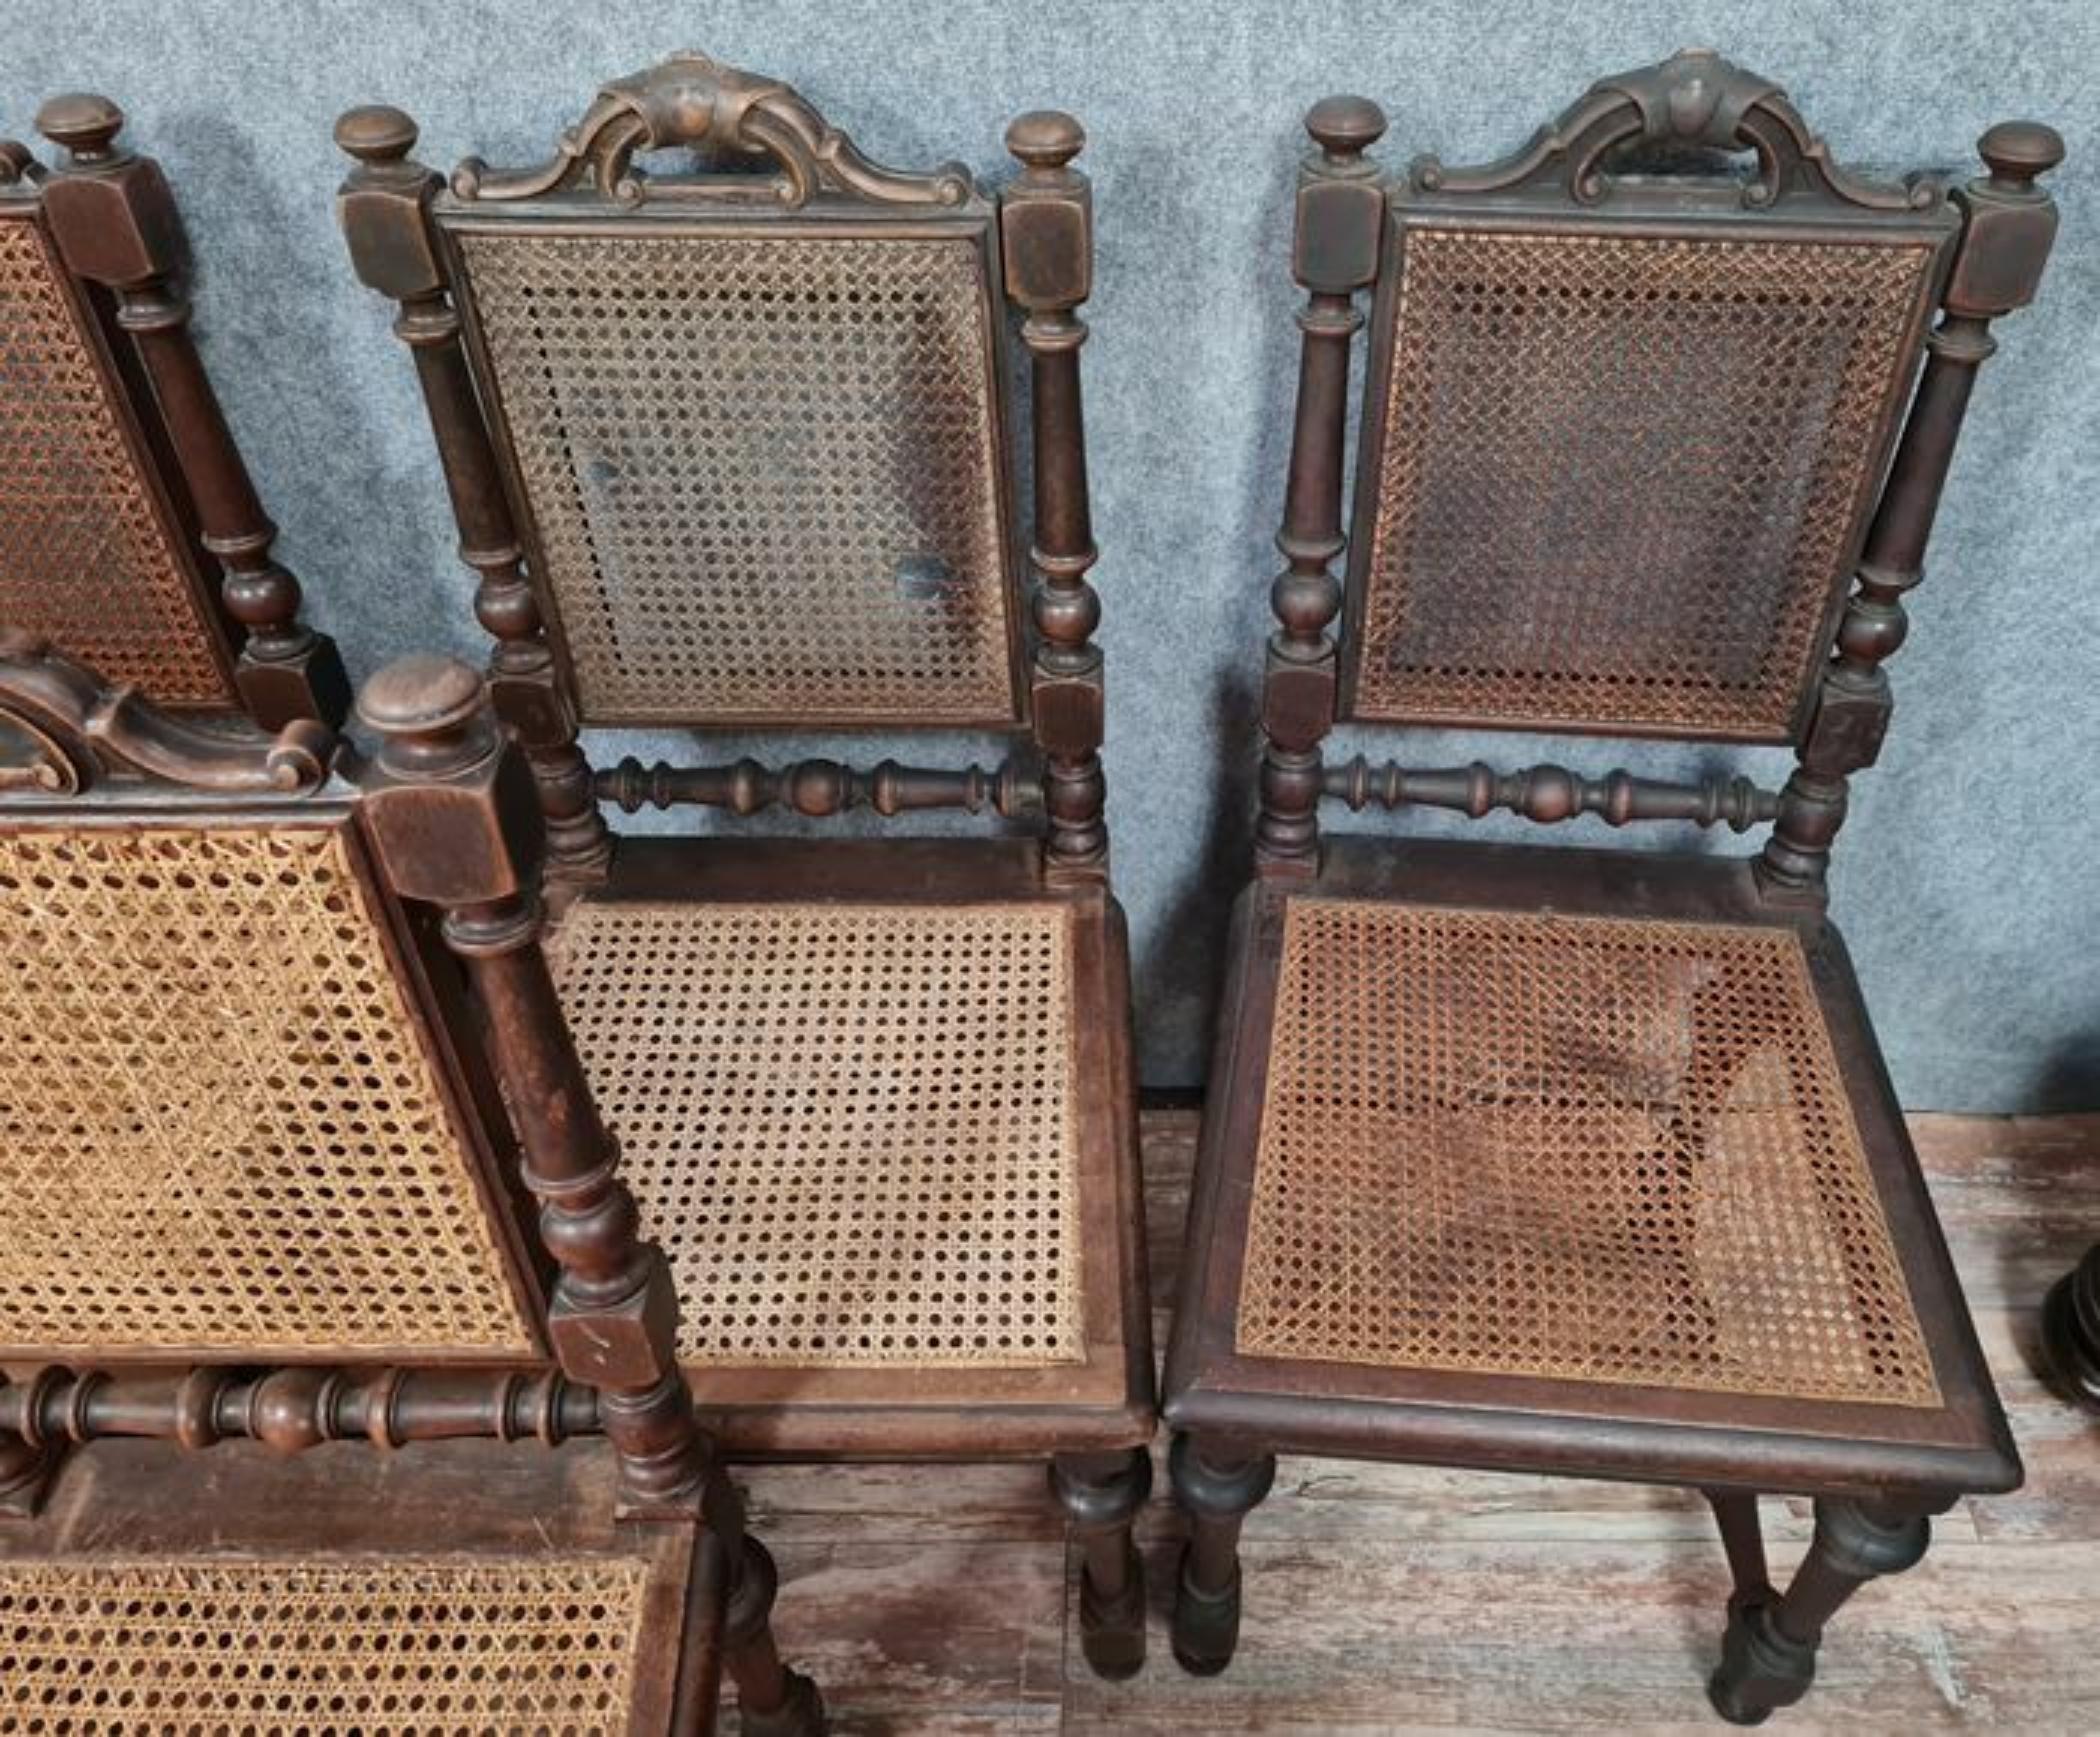 Make a statement in your home with this remarkable set of 8 Renaissance hunt pavilion chairs crafted from walnut and dating back to circa 1850.

Each chair features intricately woven cane seats and backs, exuding both elegance and comfort. Adorned